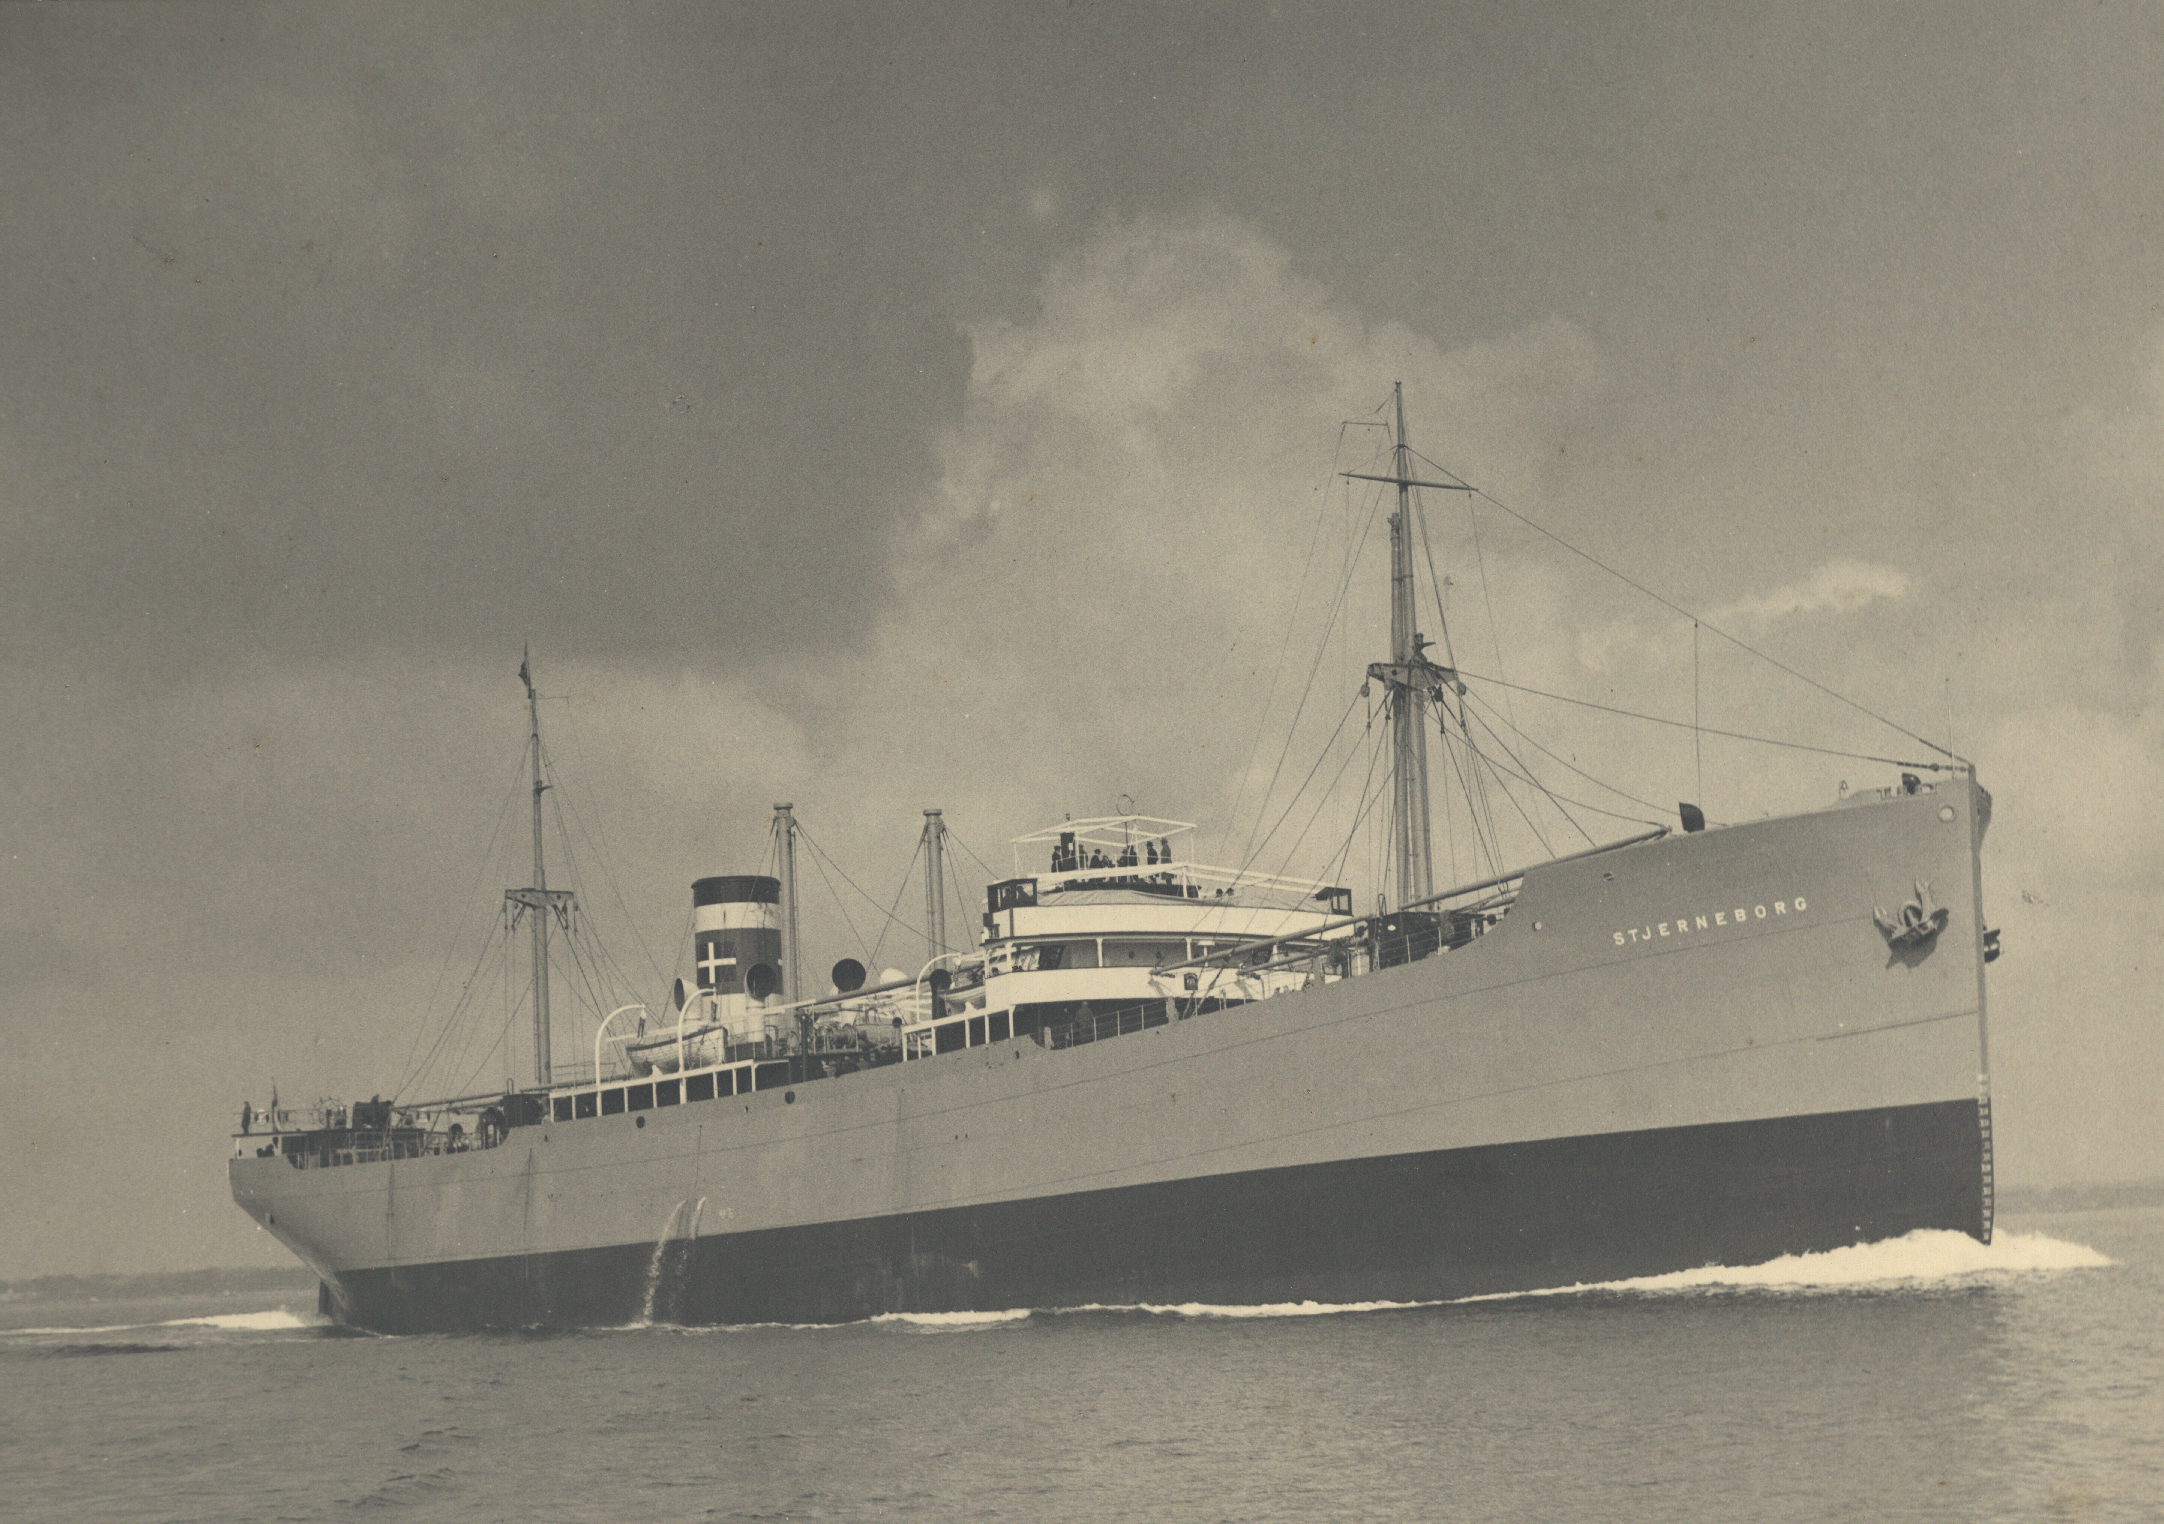 Egeberg was engaged as a cabin boy on-board the Danish ship MS <i>Stjerneborg</i> (1942) on 8 November 1933. This was his first voyage as a sailor. The ship was torpeded by a German submarine (<i>U-156</i>) on 13 May 1943 about 300 miles north-northeast of Barbados.